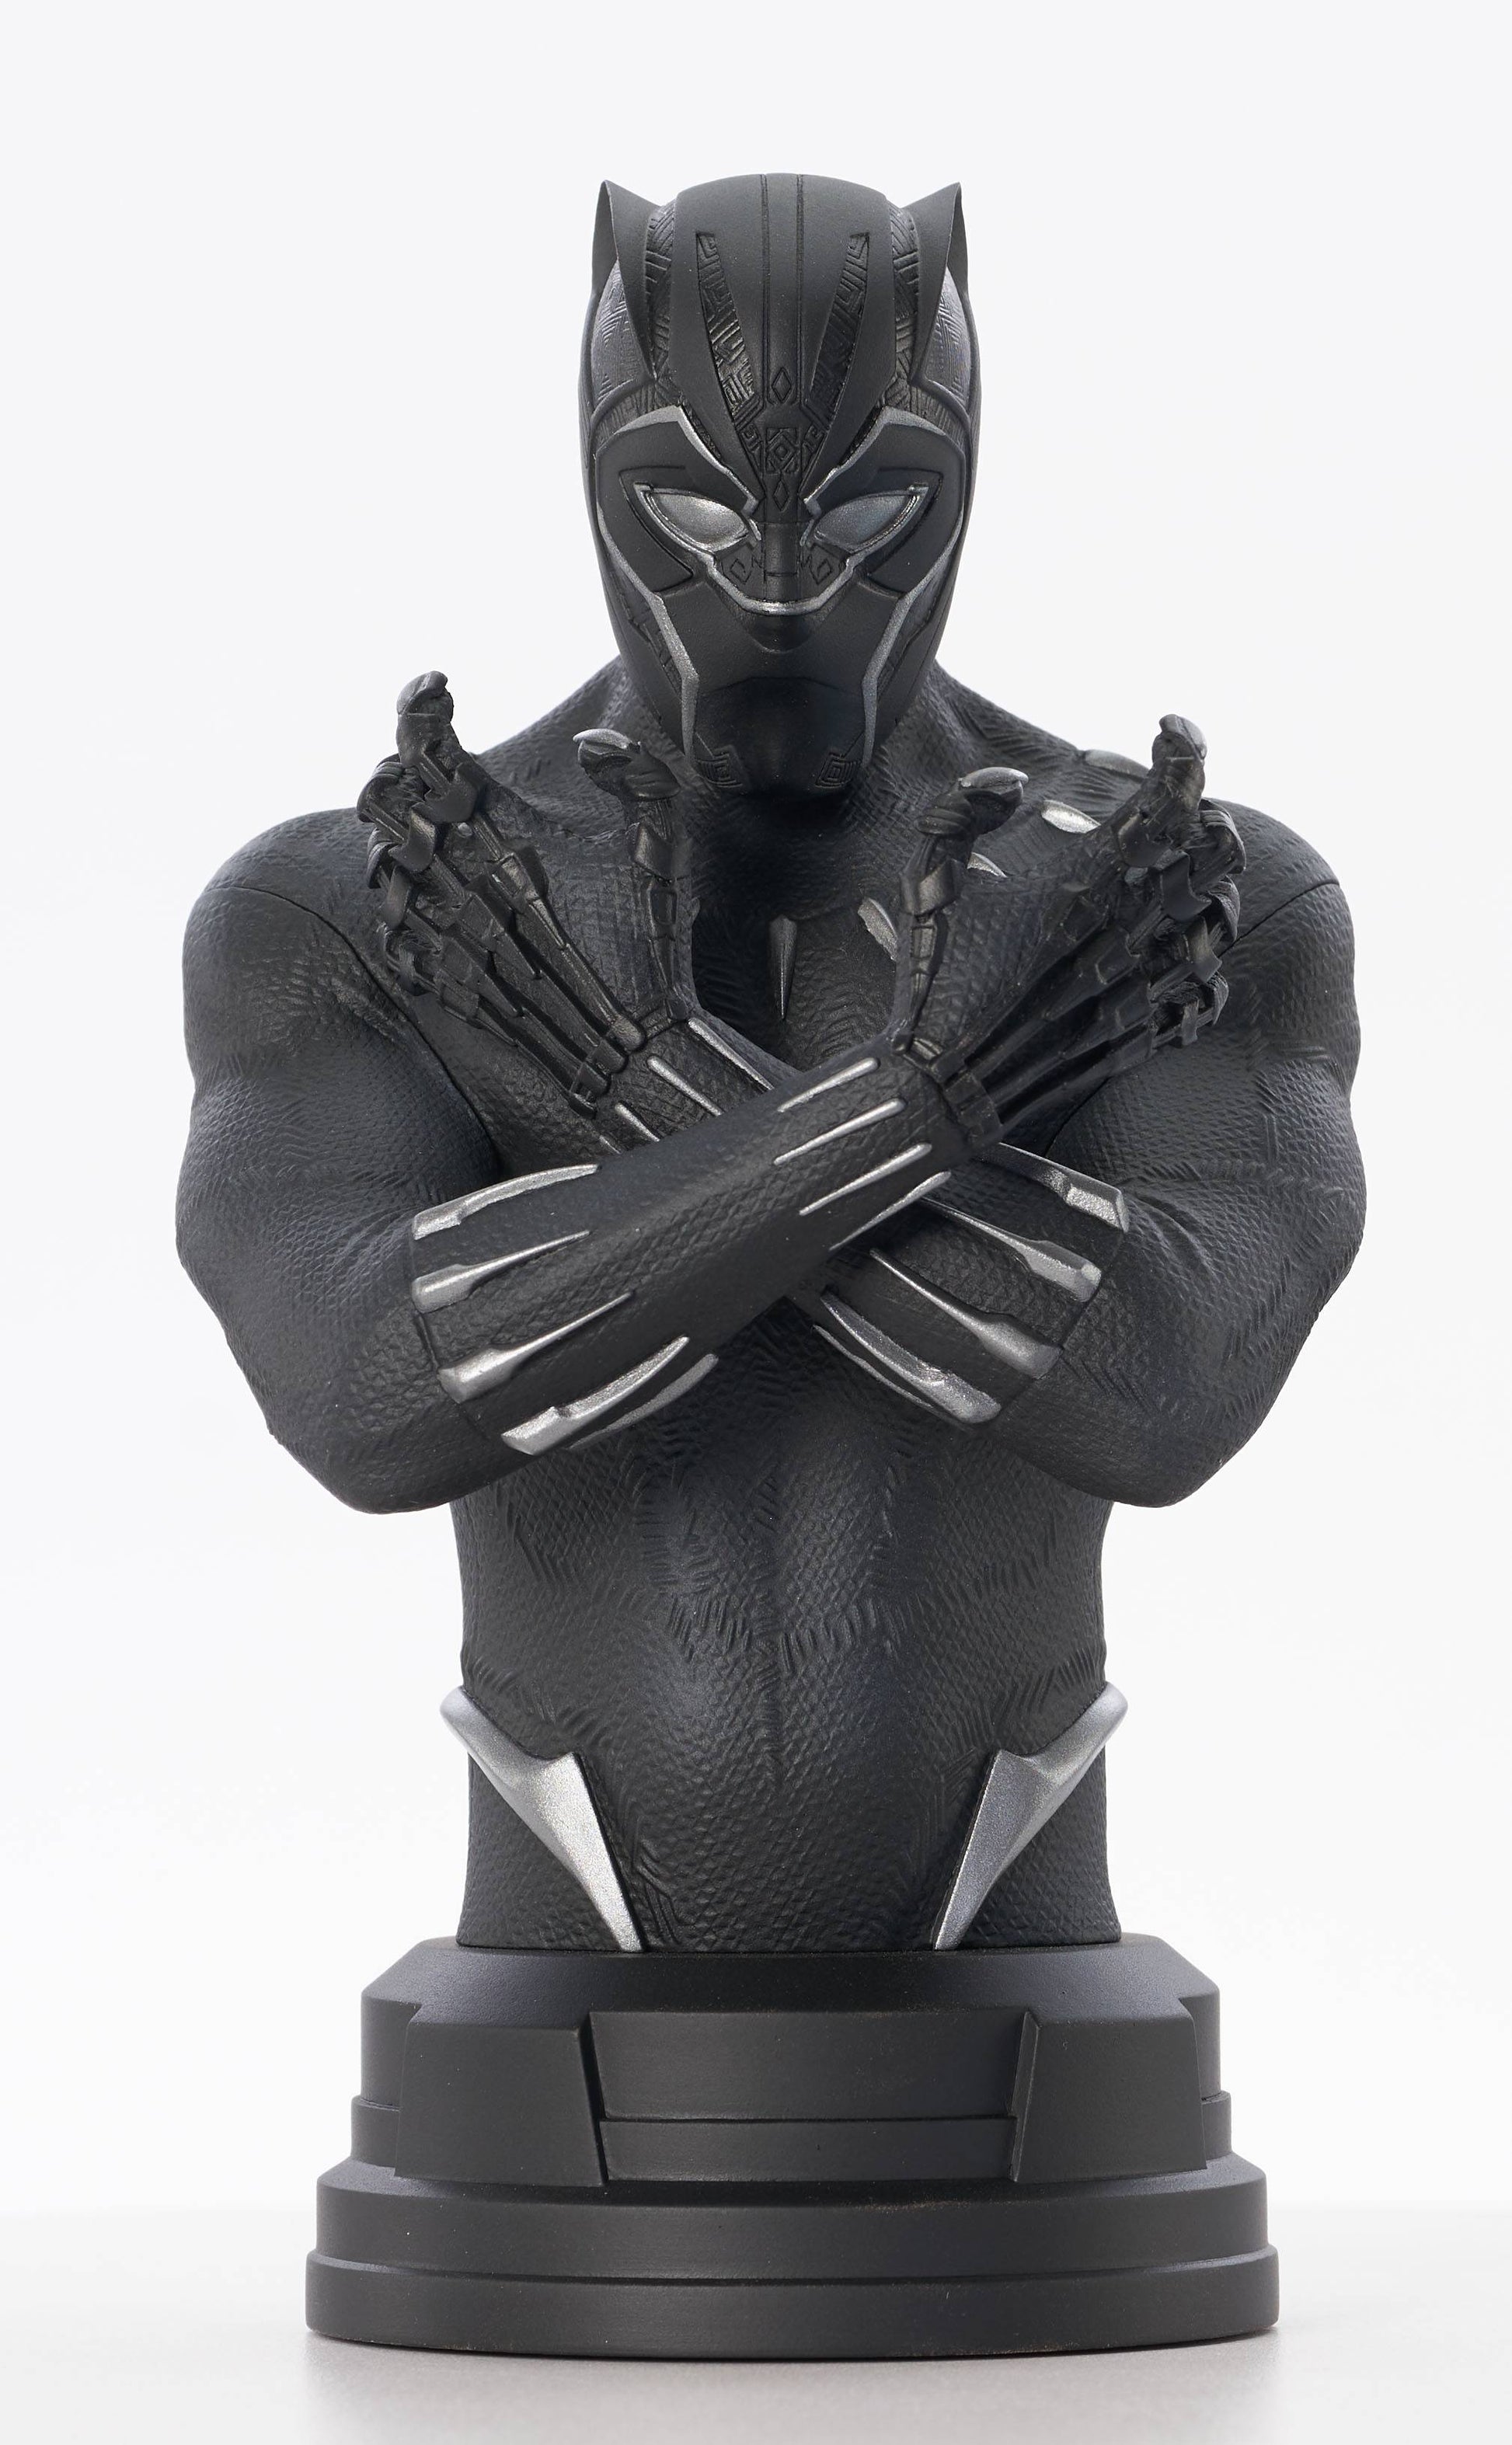 The One Stop Shop Comics & Games Marvel Avengers Endgame Black Panther 1/6 Scale Bust (C: 1-1 (10/26/2022) DIAMOND SELECT TOYS LLC